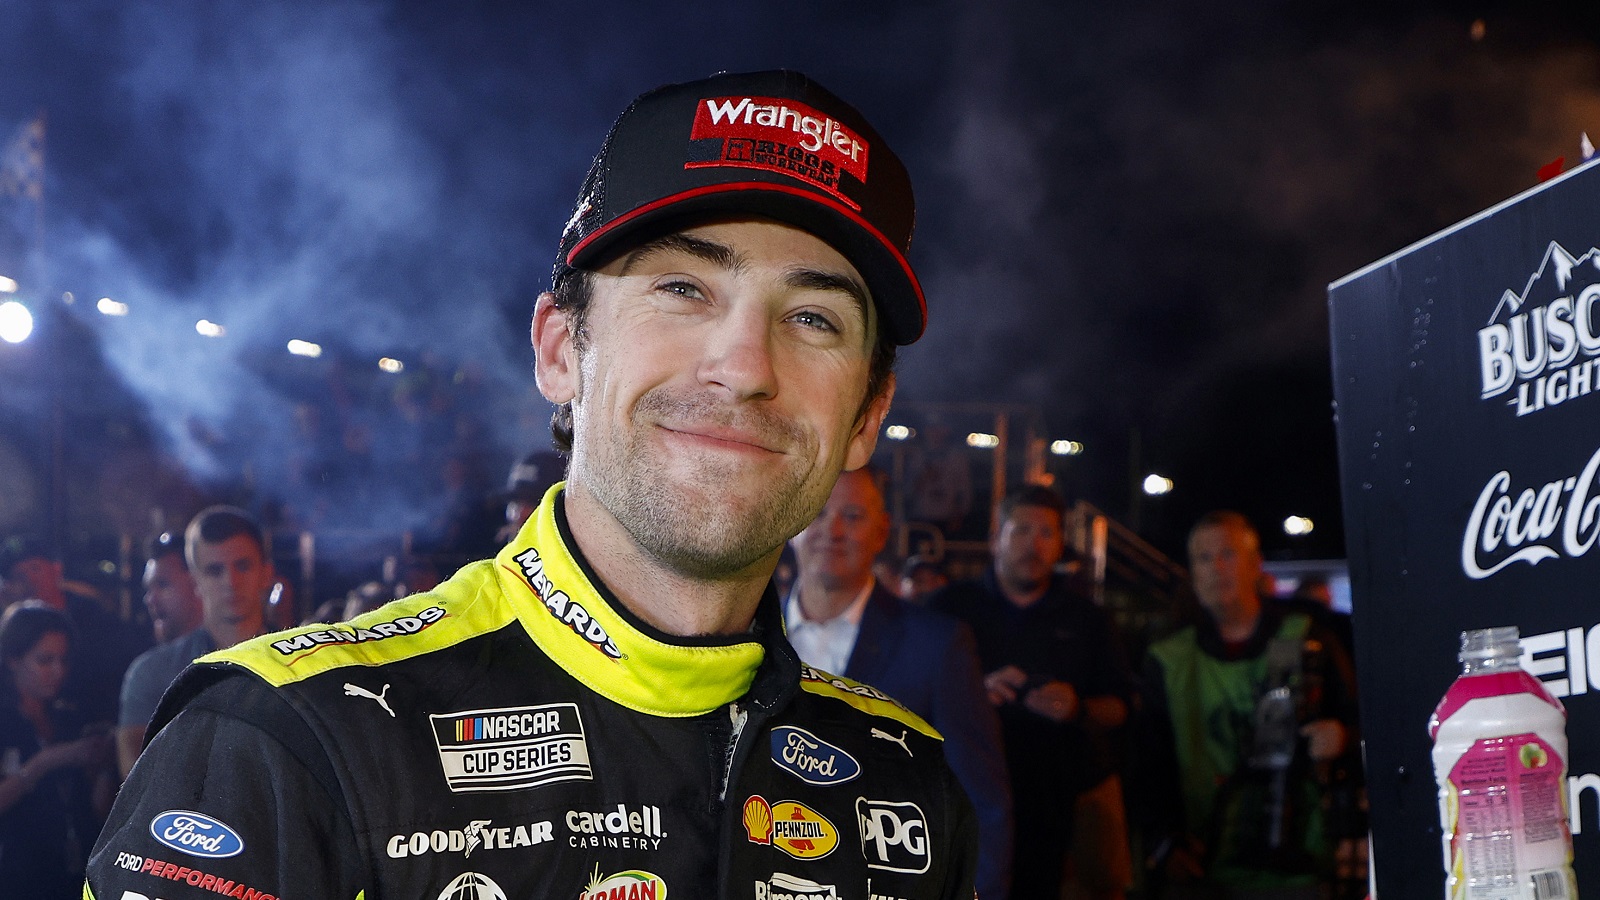 Ryan Blaney in Victory Lane after winning the NASCAR Cup Series All-Star Race at Texas Motor Speedway on May 22, 2022. | Chris Graythen/Getty Images